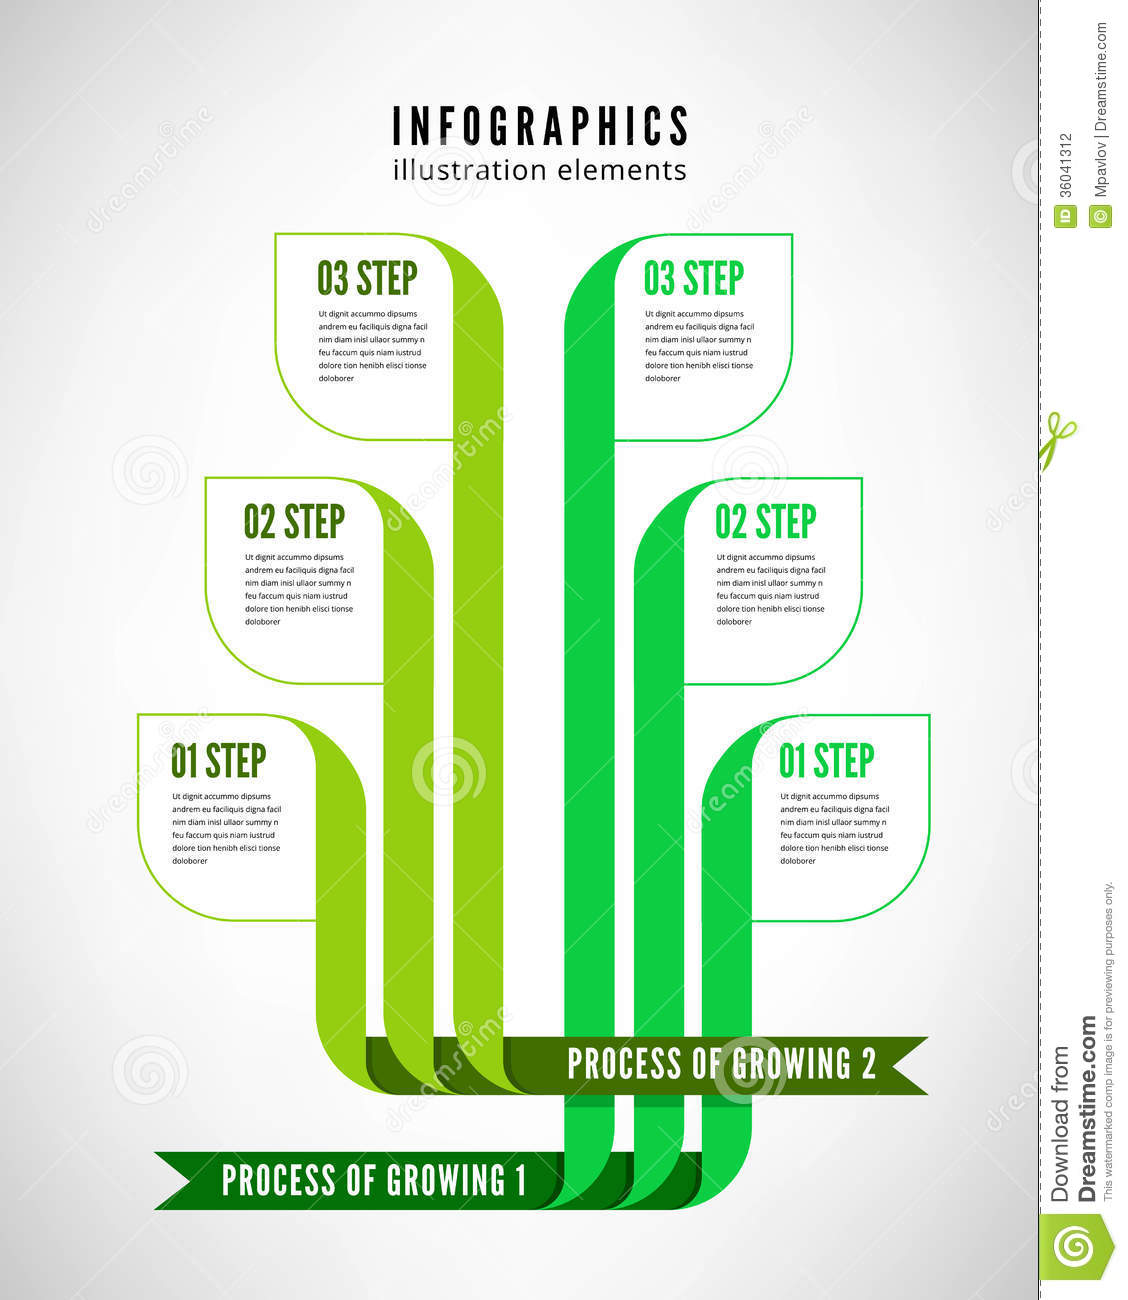 Product Process Infographic